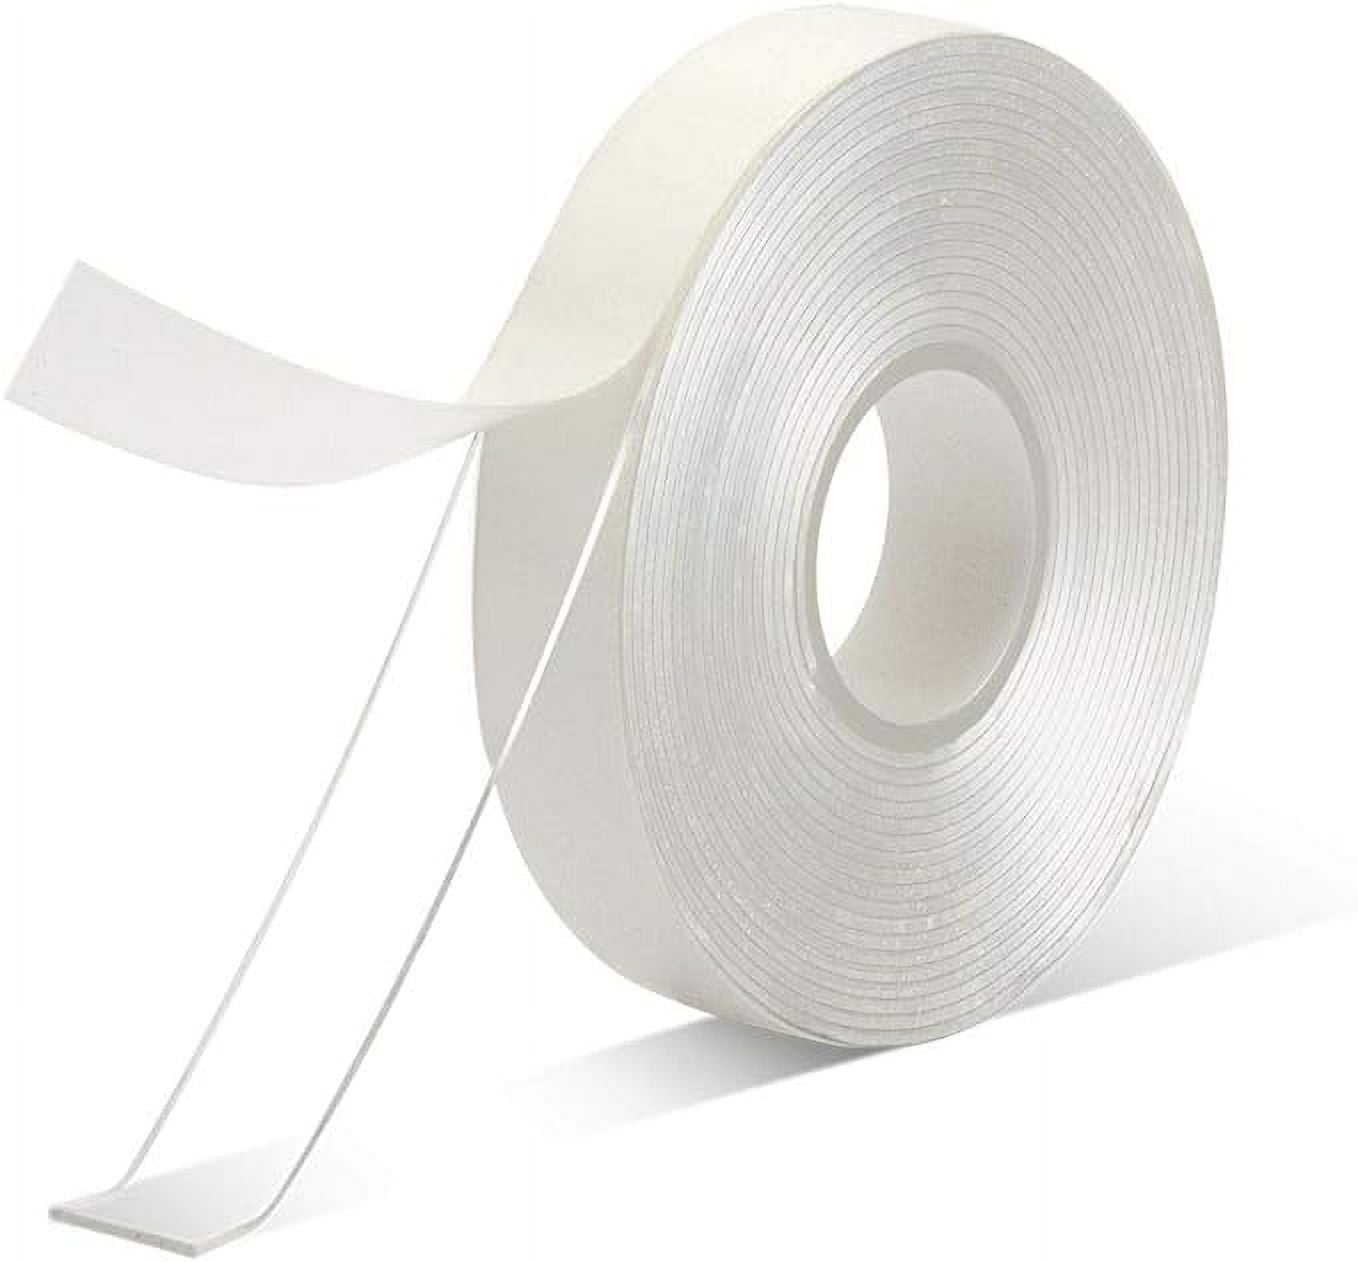 Wiueurtly Duct Tape Double Sided Fabric Tape Heavy Duty Durable